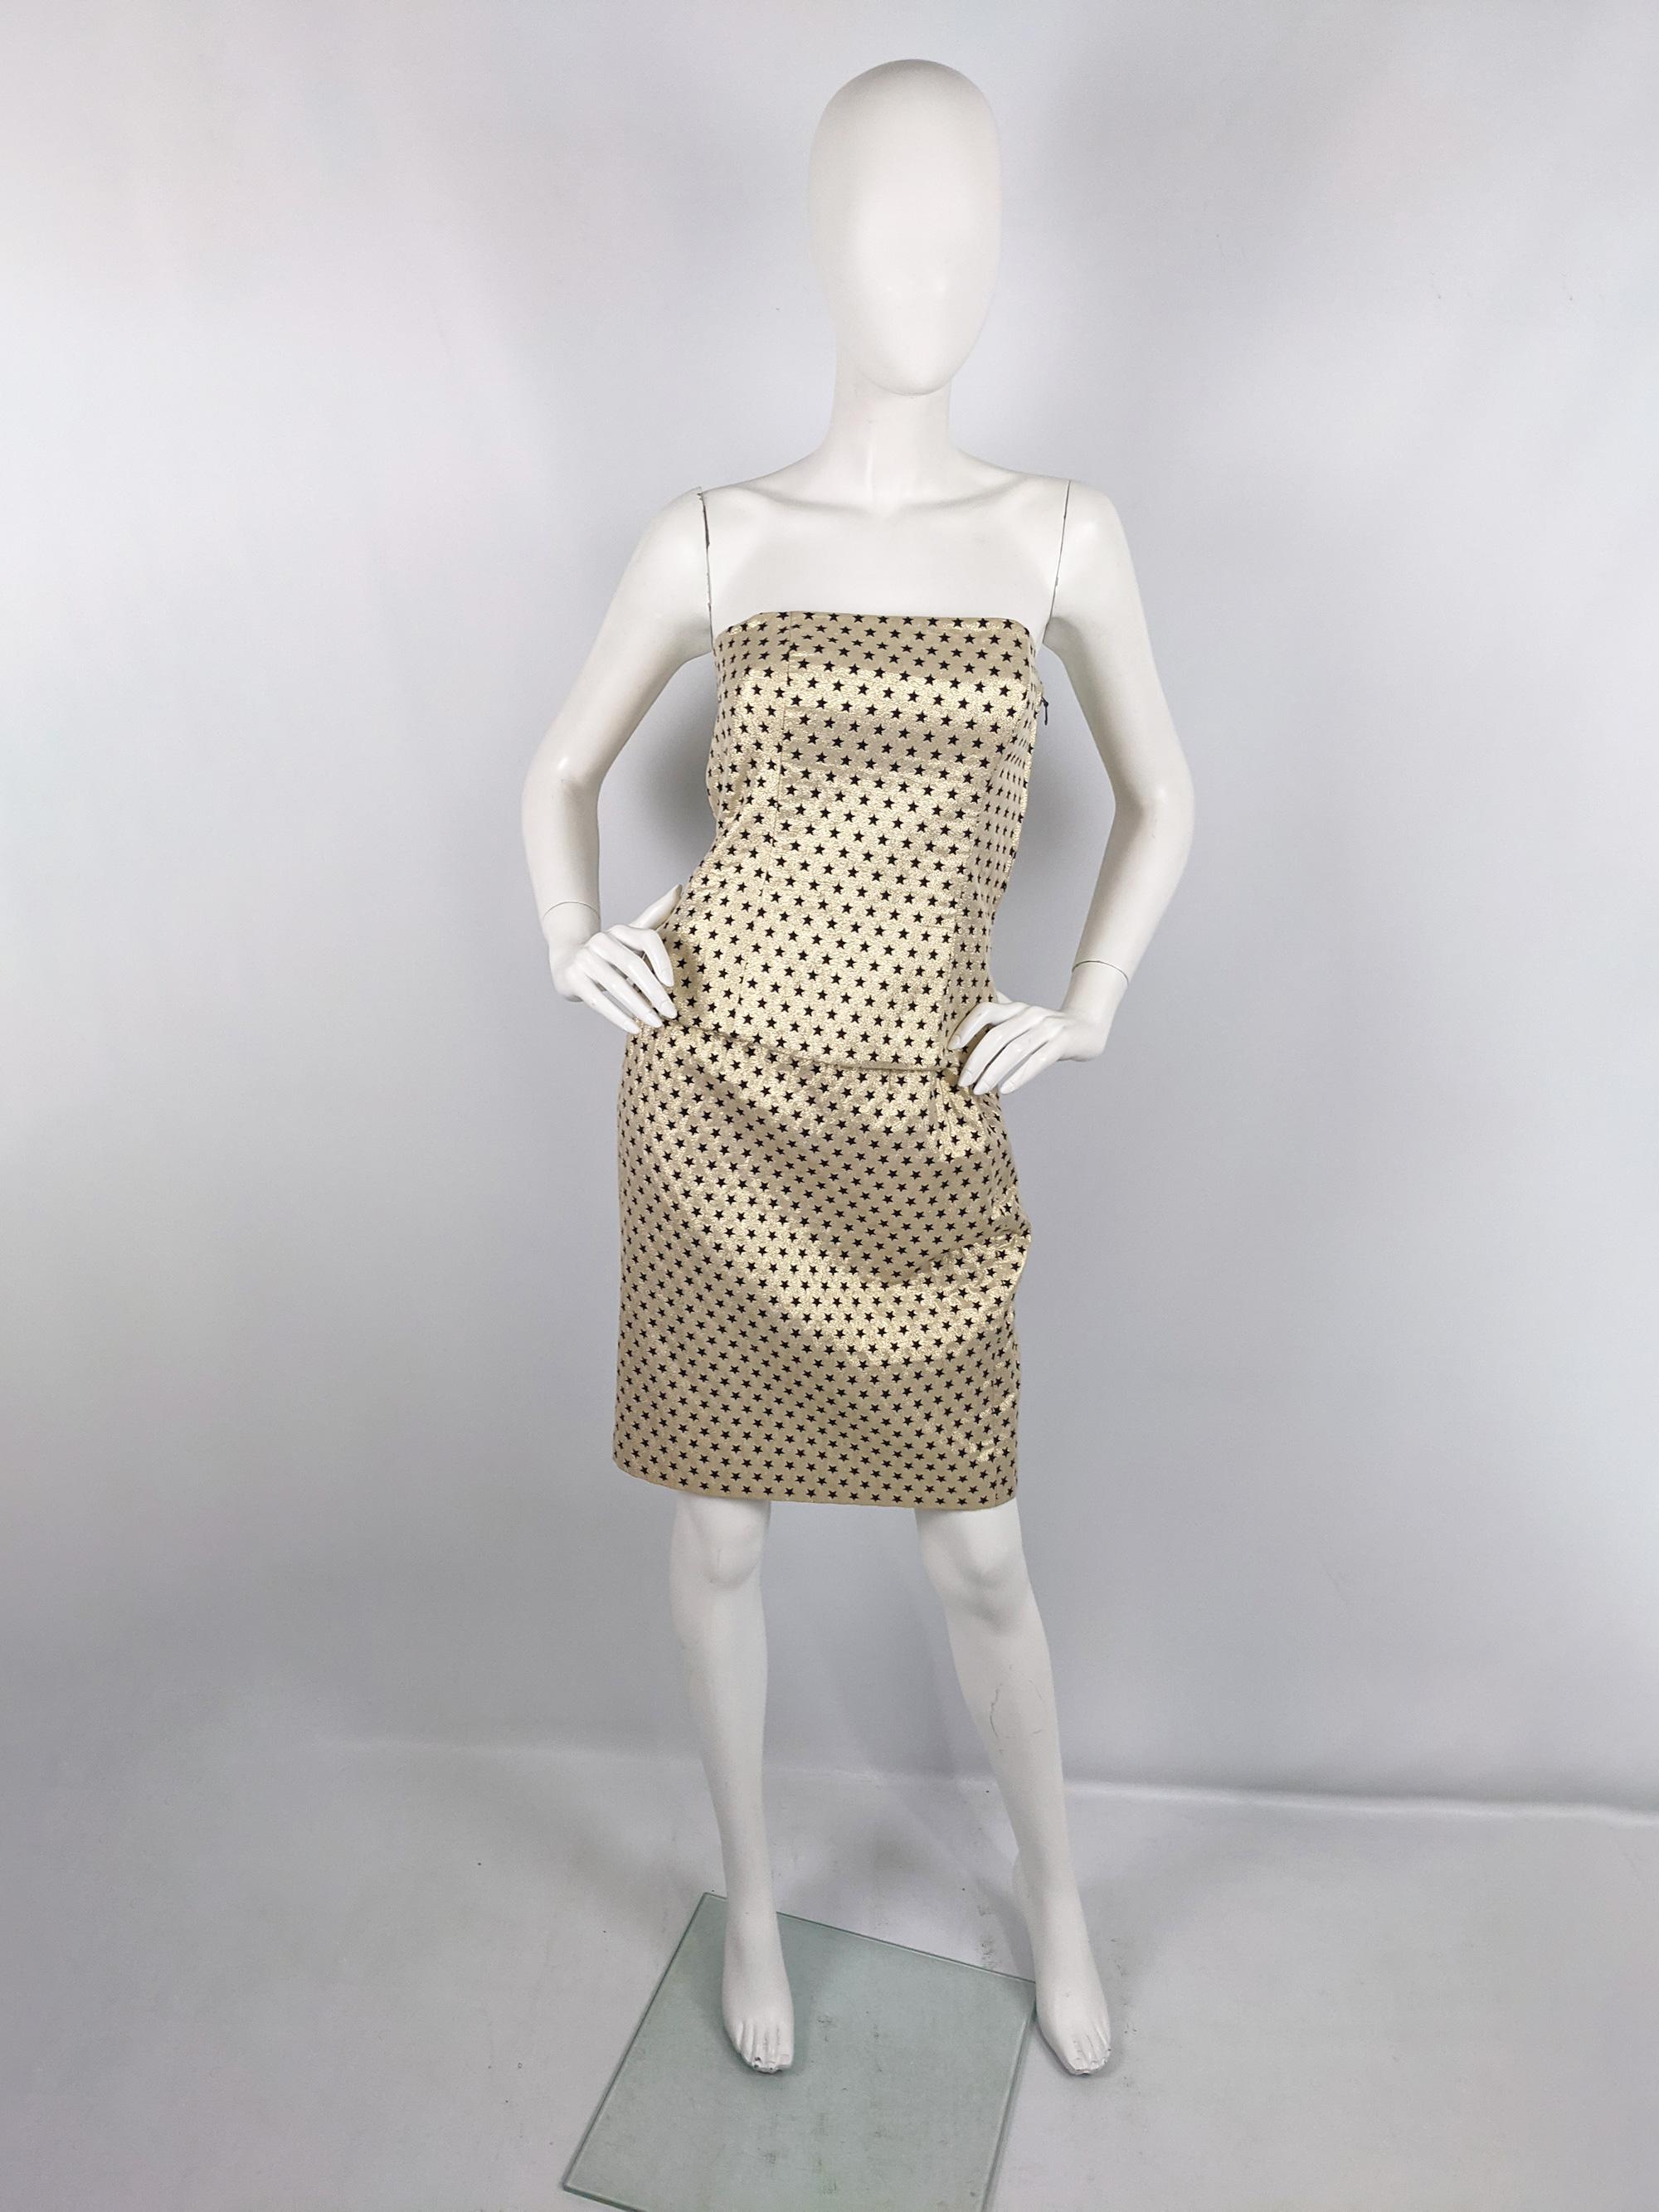 A fabulous and rare vintage Escada two piece set from the early 90s by luxury fashion house, Escada. In a metallic gold cotton and lamé fabric with a black star pattern woven throughout. Consisting of a strapless, boned bodice top and a matching